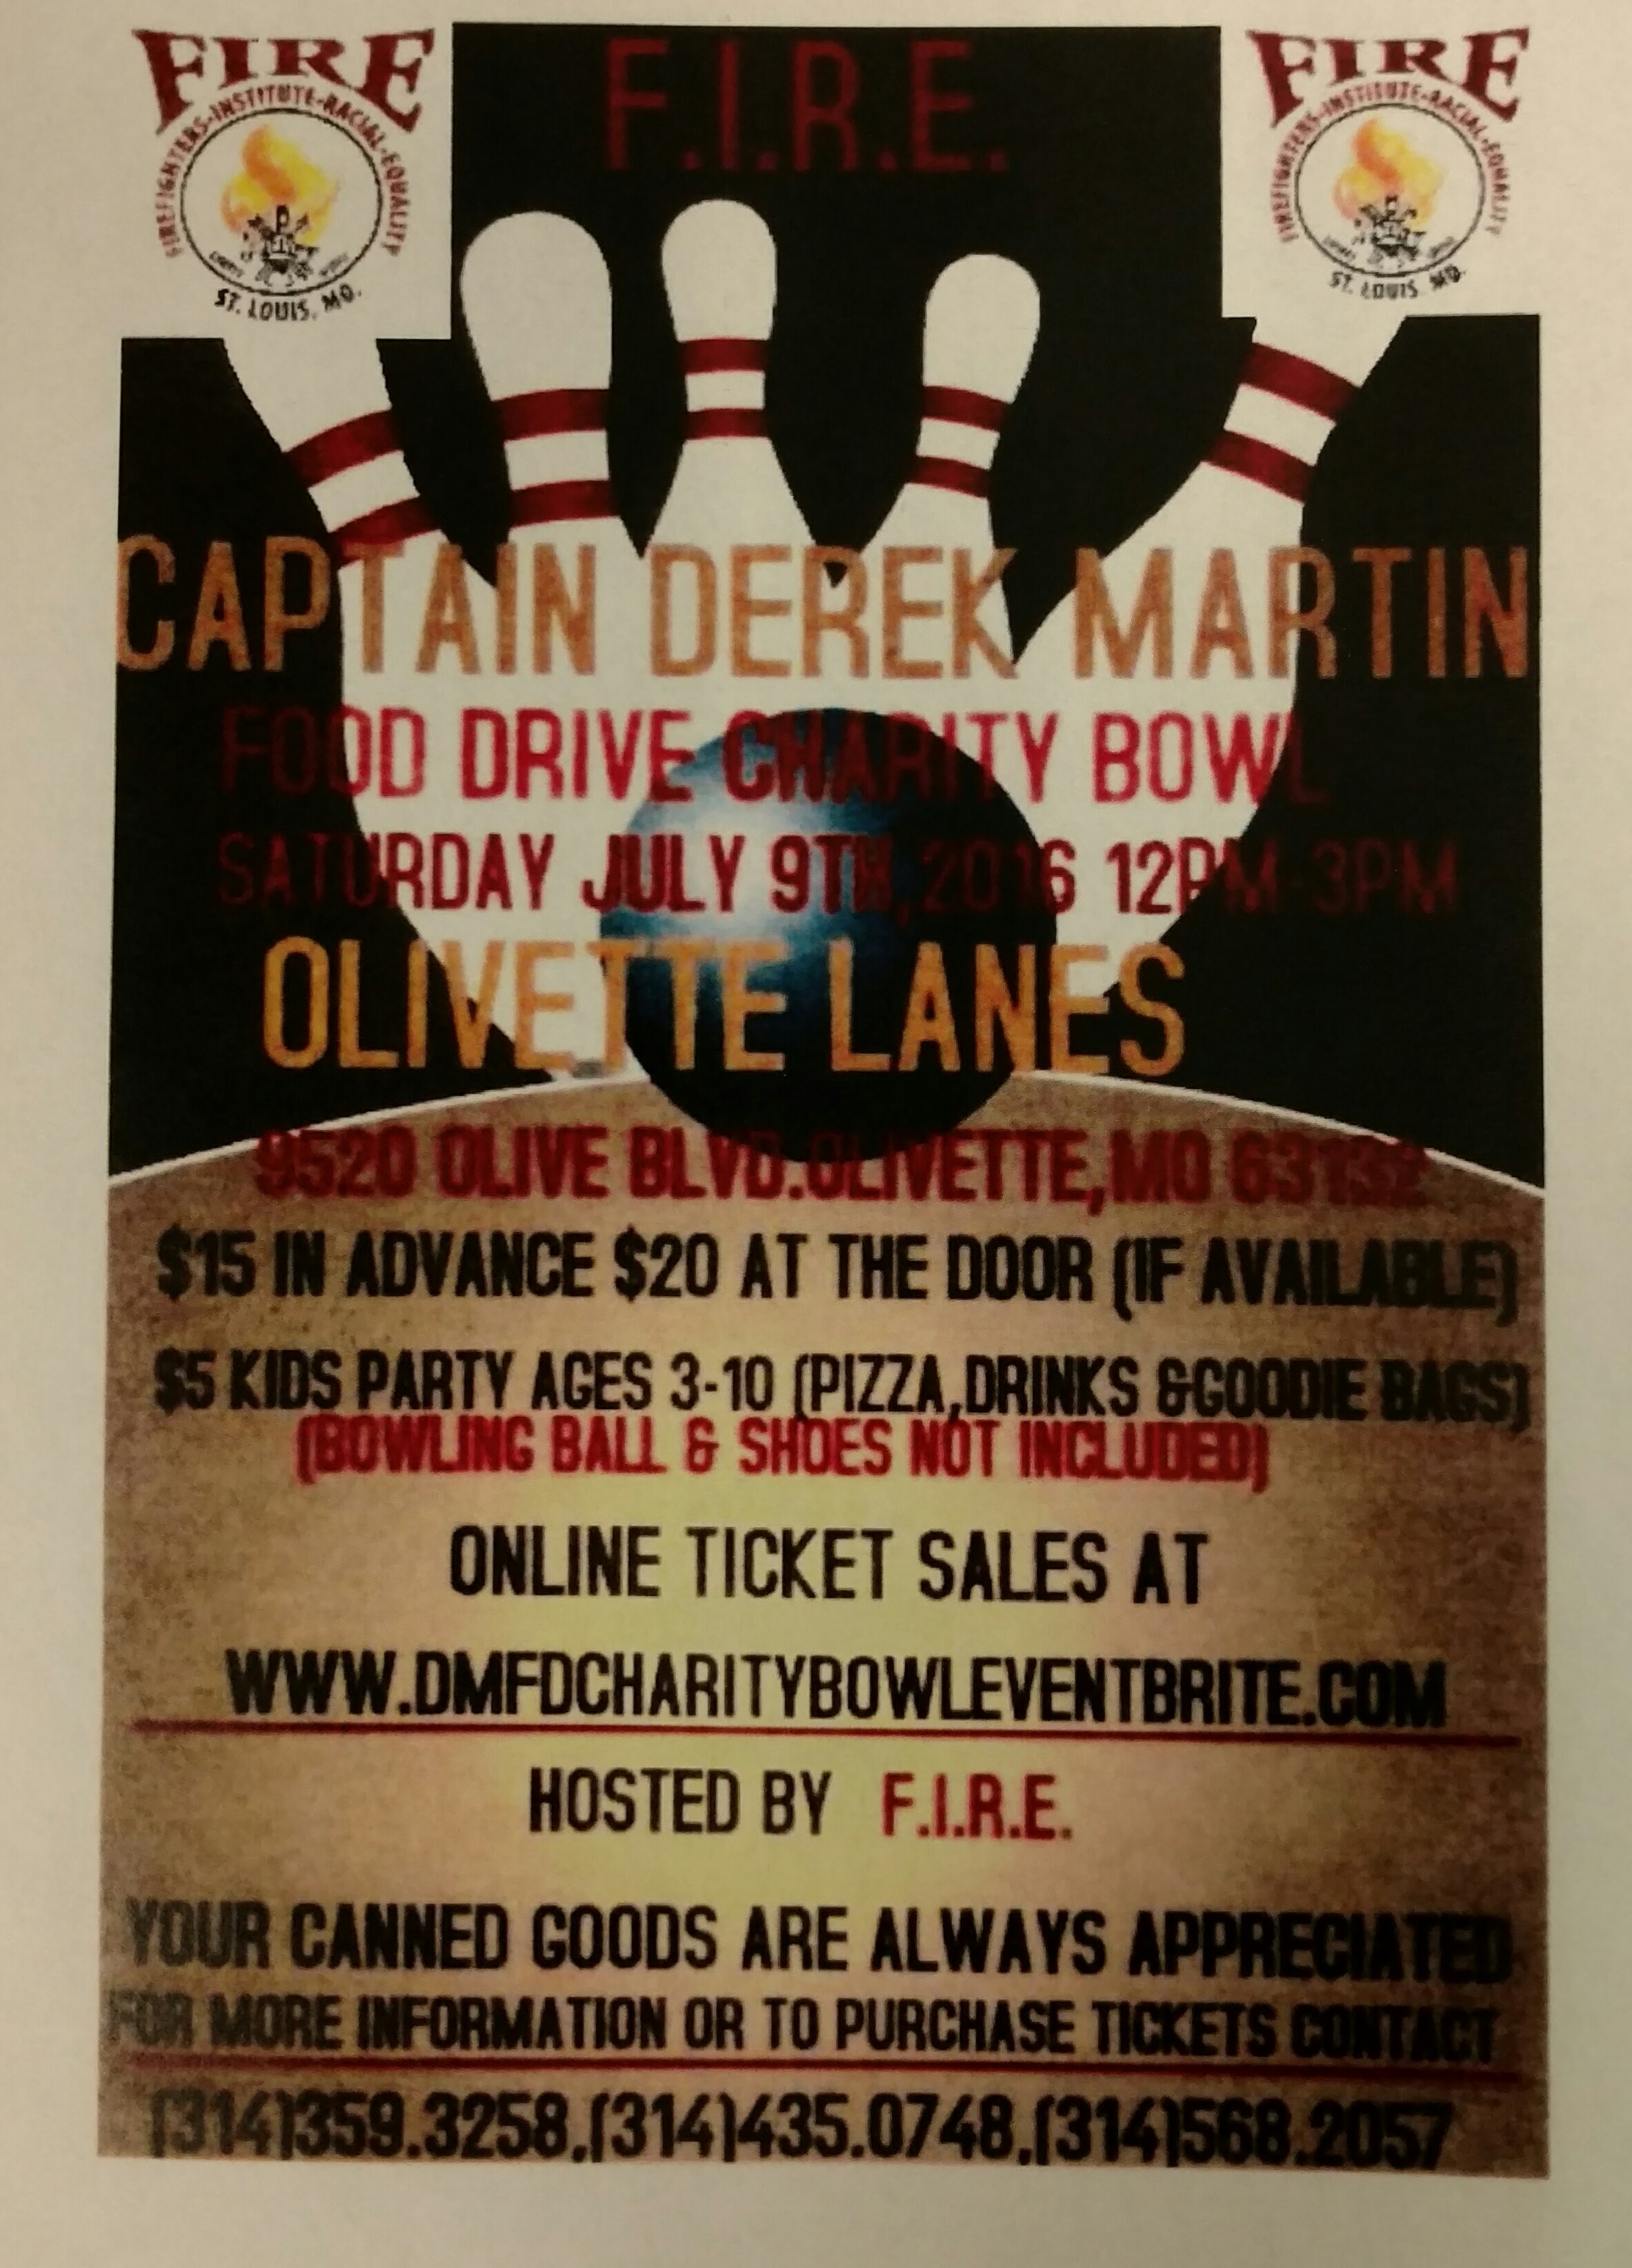 Flyer for the 2016 Captain Derek Martin Food Drive Charity Bowl 